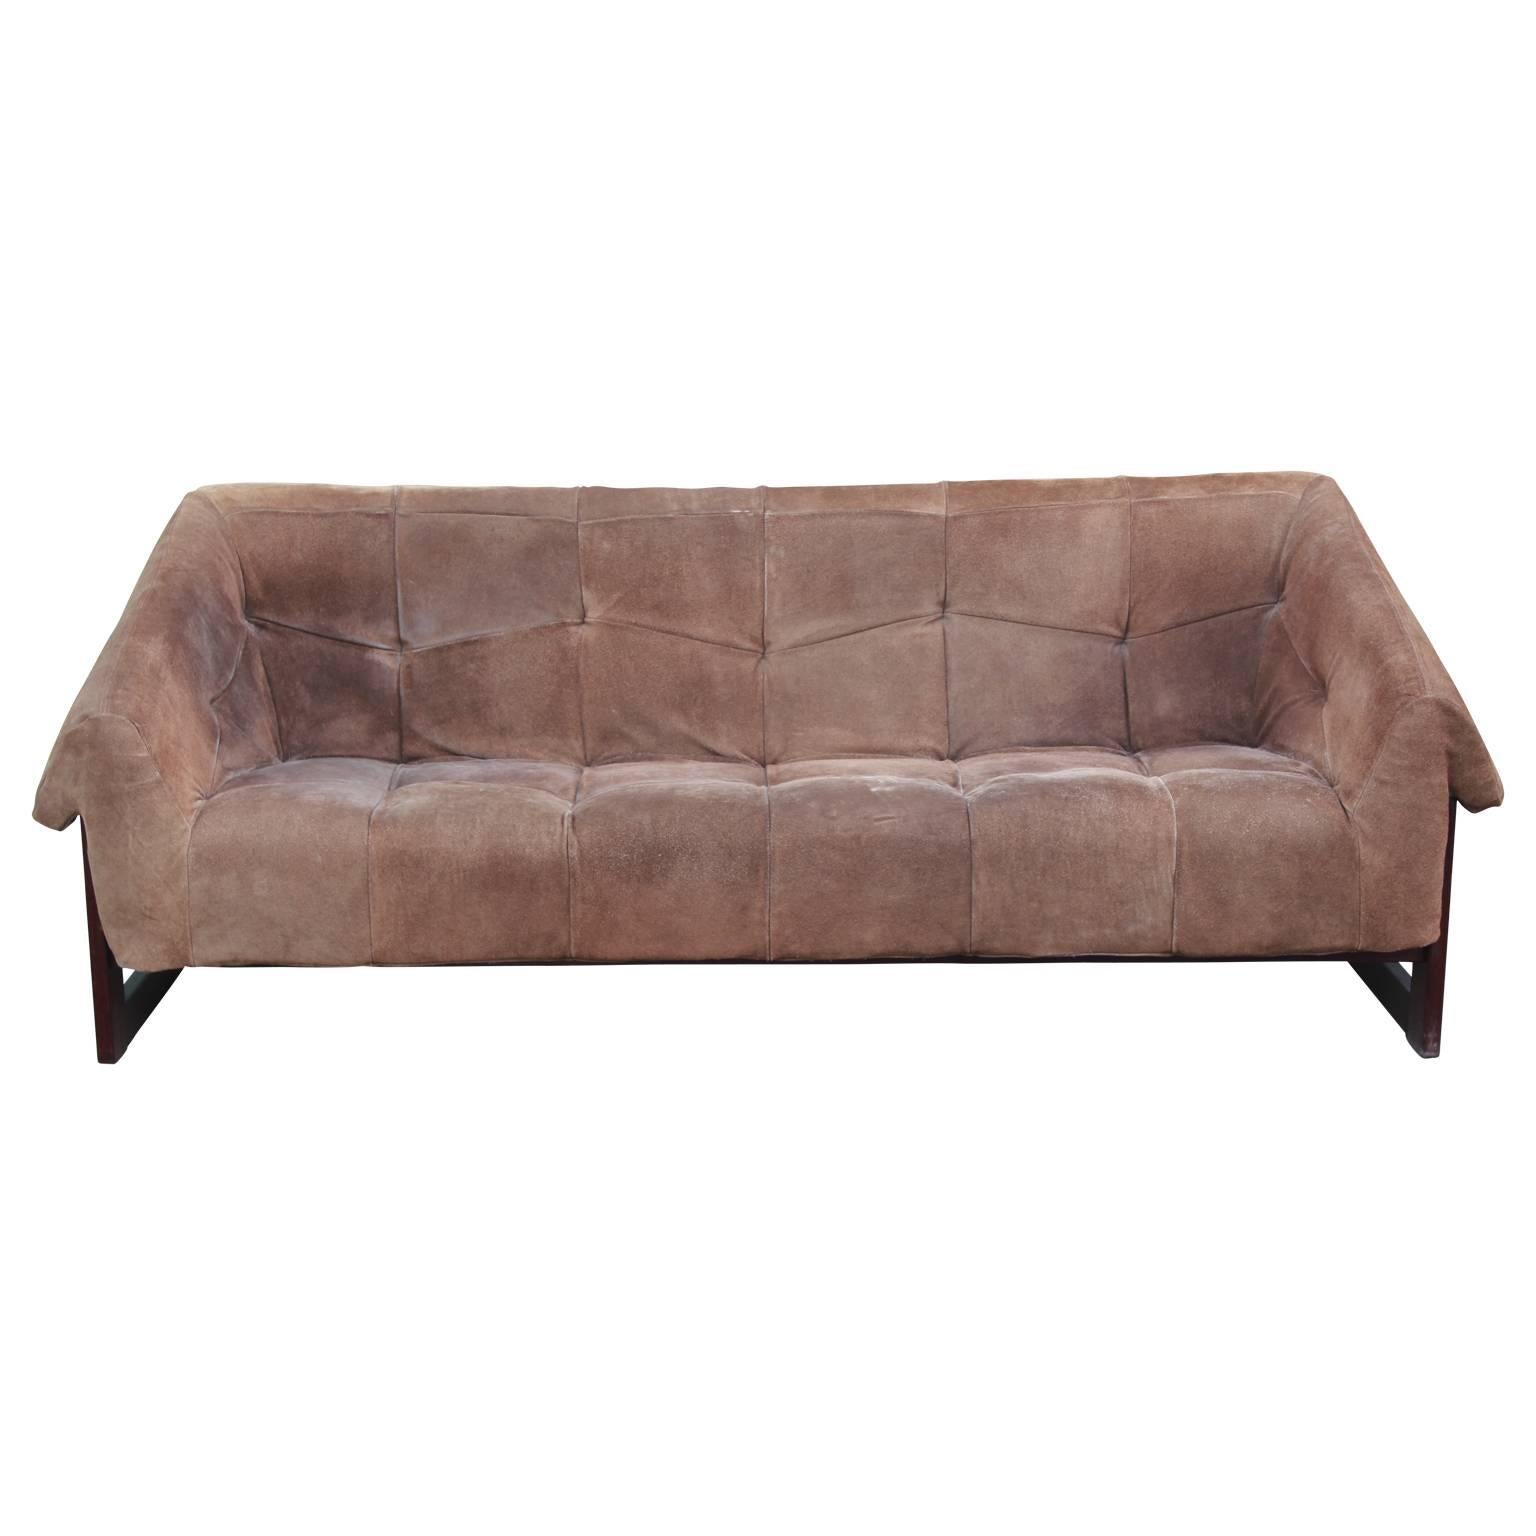 Unique Percival Lafer brown suede and rosewood sofa with leather strapping. The fabric is in it's original condition and needs to be recovered.